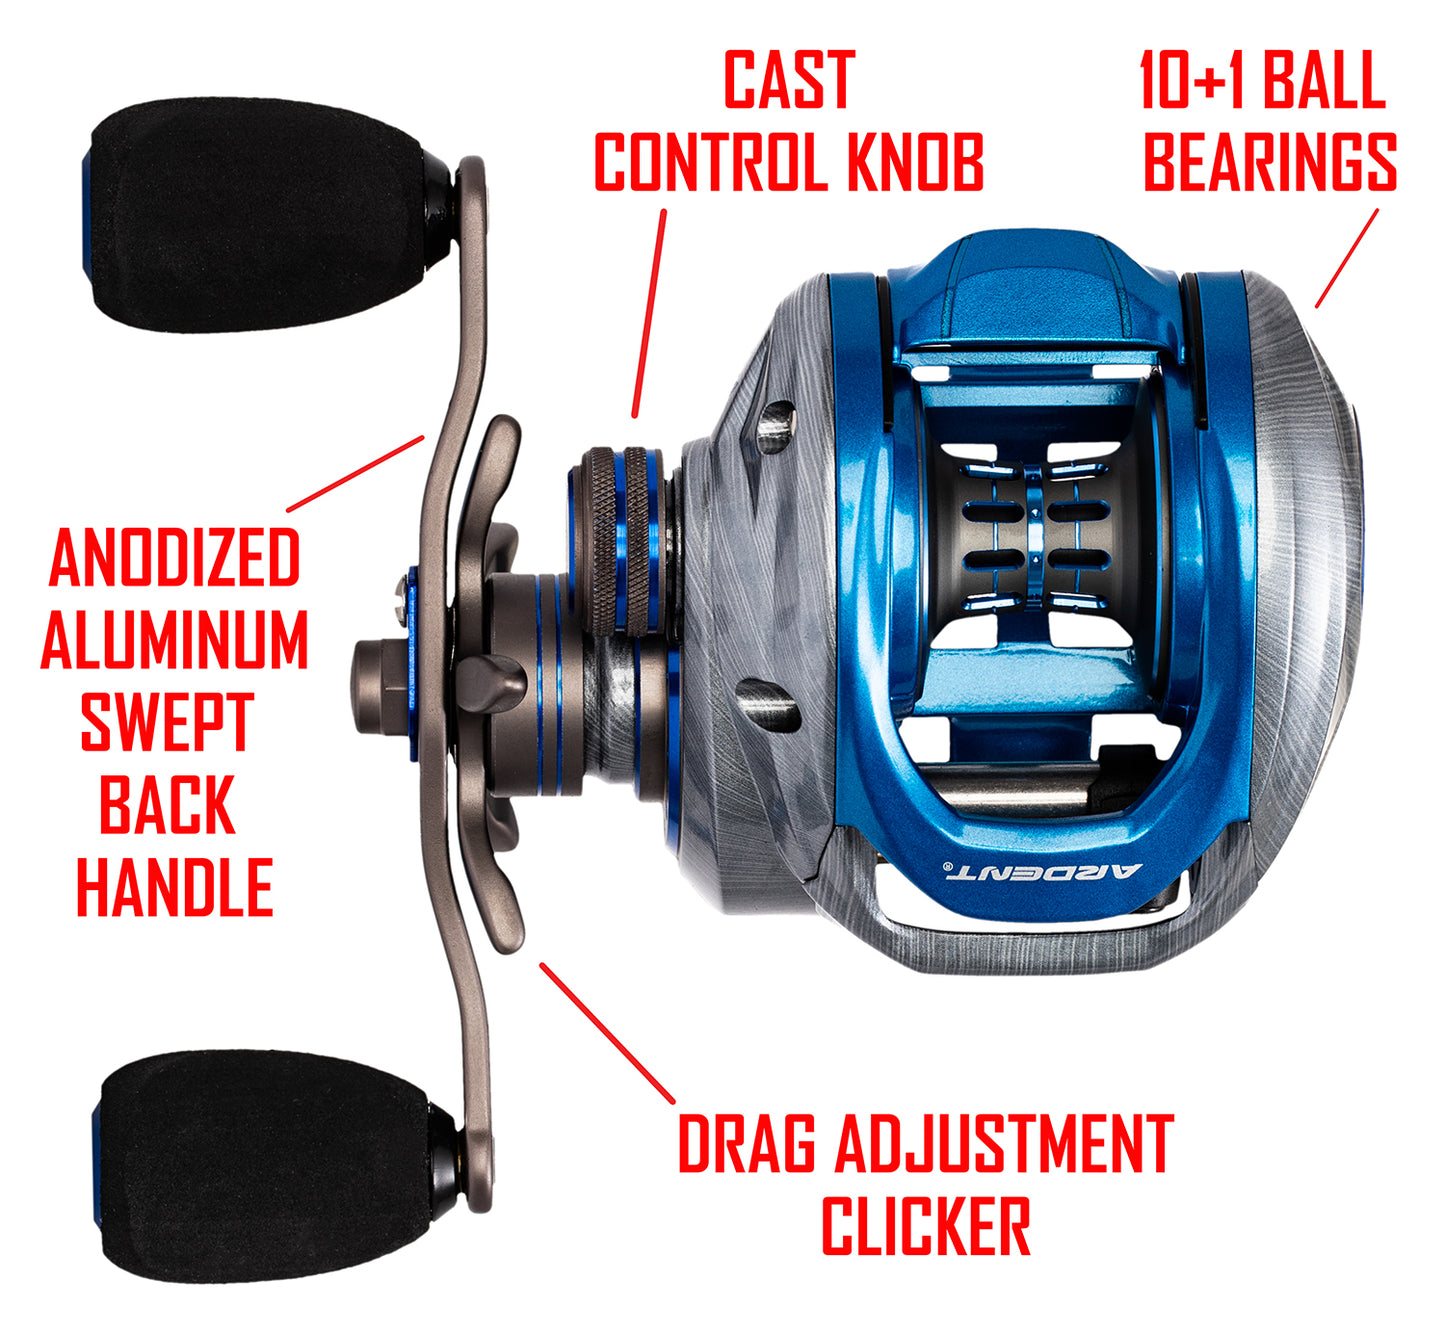 Silver and blue SUMMIT HAWK Baitcaster with red text. text: CAST CONTROL KNOB 10+1 BALL BEARINGS ANODIZED ALUMINUM SWEPT BACK HANDLE DRAG ADJUSTMENT CLICKER